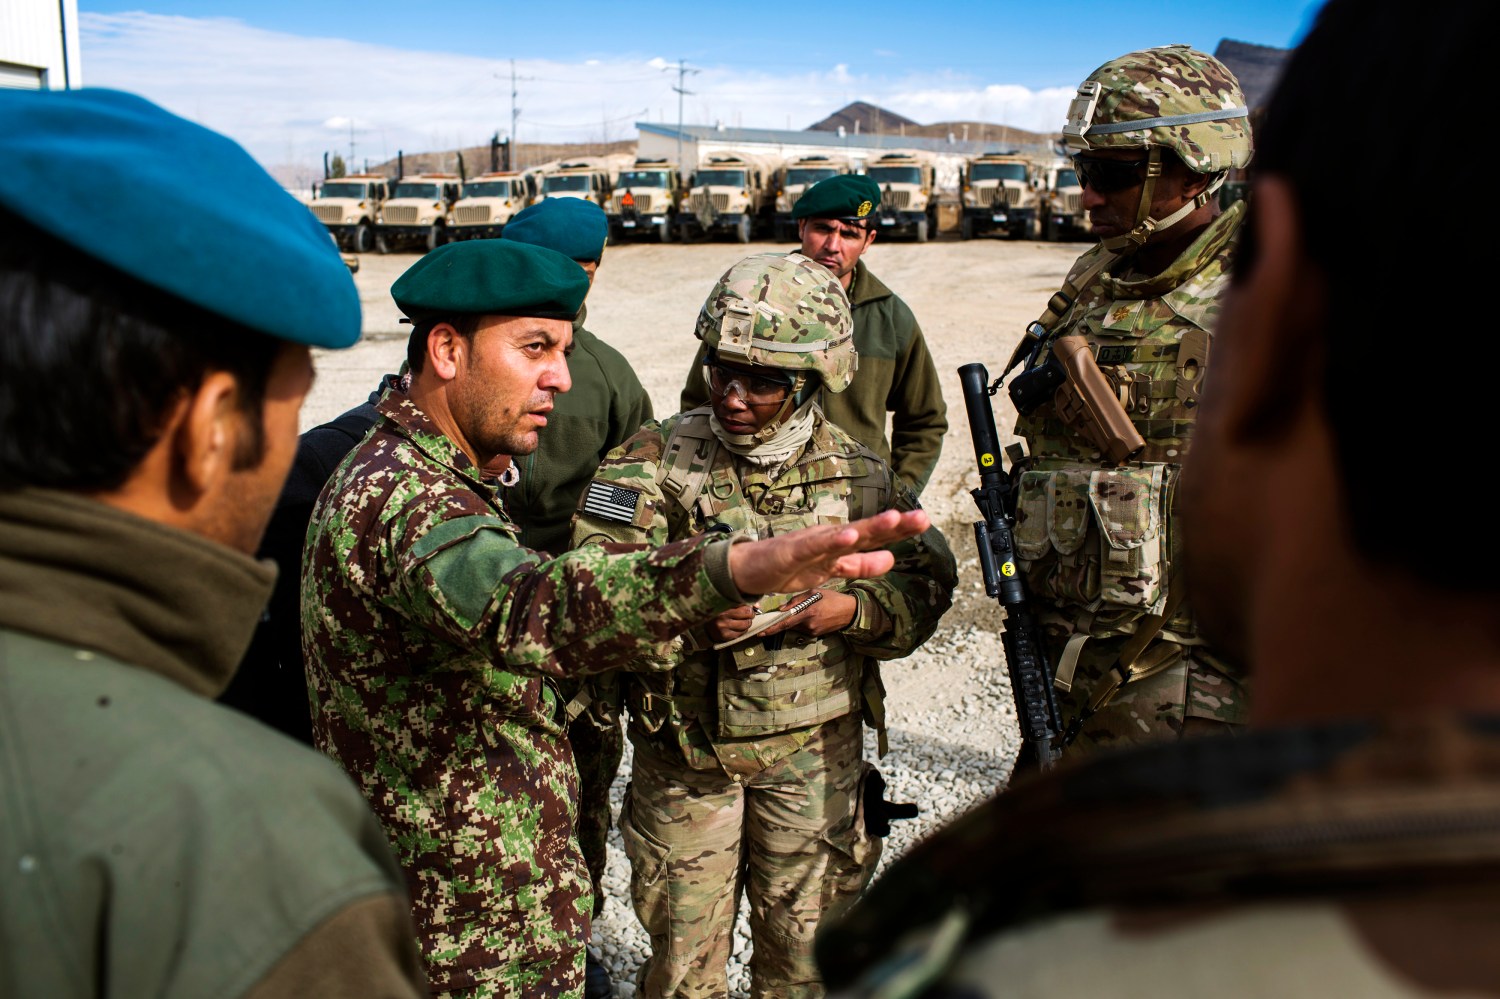 U.S. soldiers from the 3rd Cavalry Regiment speak with Afghan National Army soldiers about their logistics while on an advising mission at the Afghan National Army headquarters for the 203rd Corps in the Paktia province of Afghanistan December 21, 2014. REUTERS/Lucas Jackson (AFGHANISTAN - Tags: CIVIL UNREST POLITICS MILITARY) - RTR4IUML